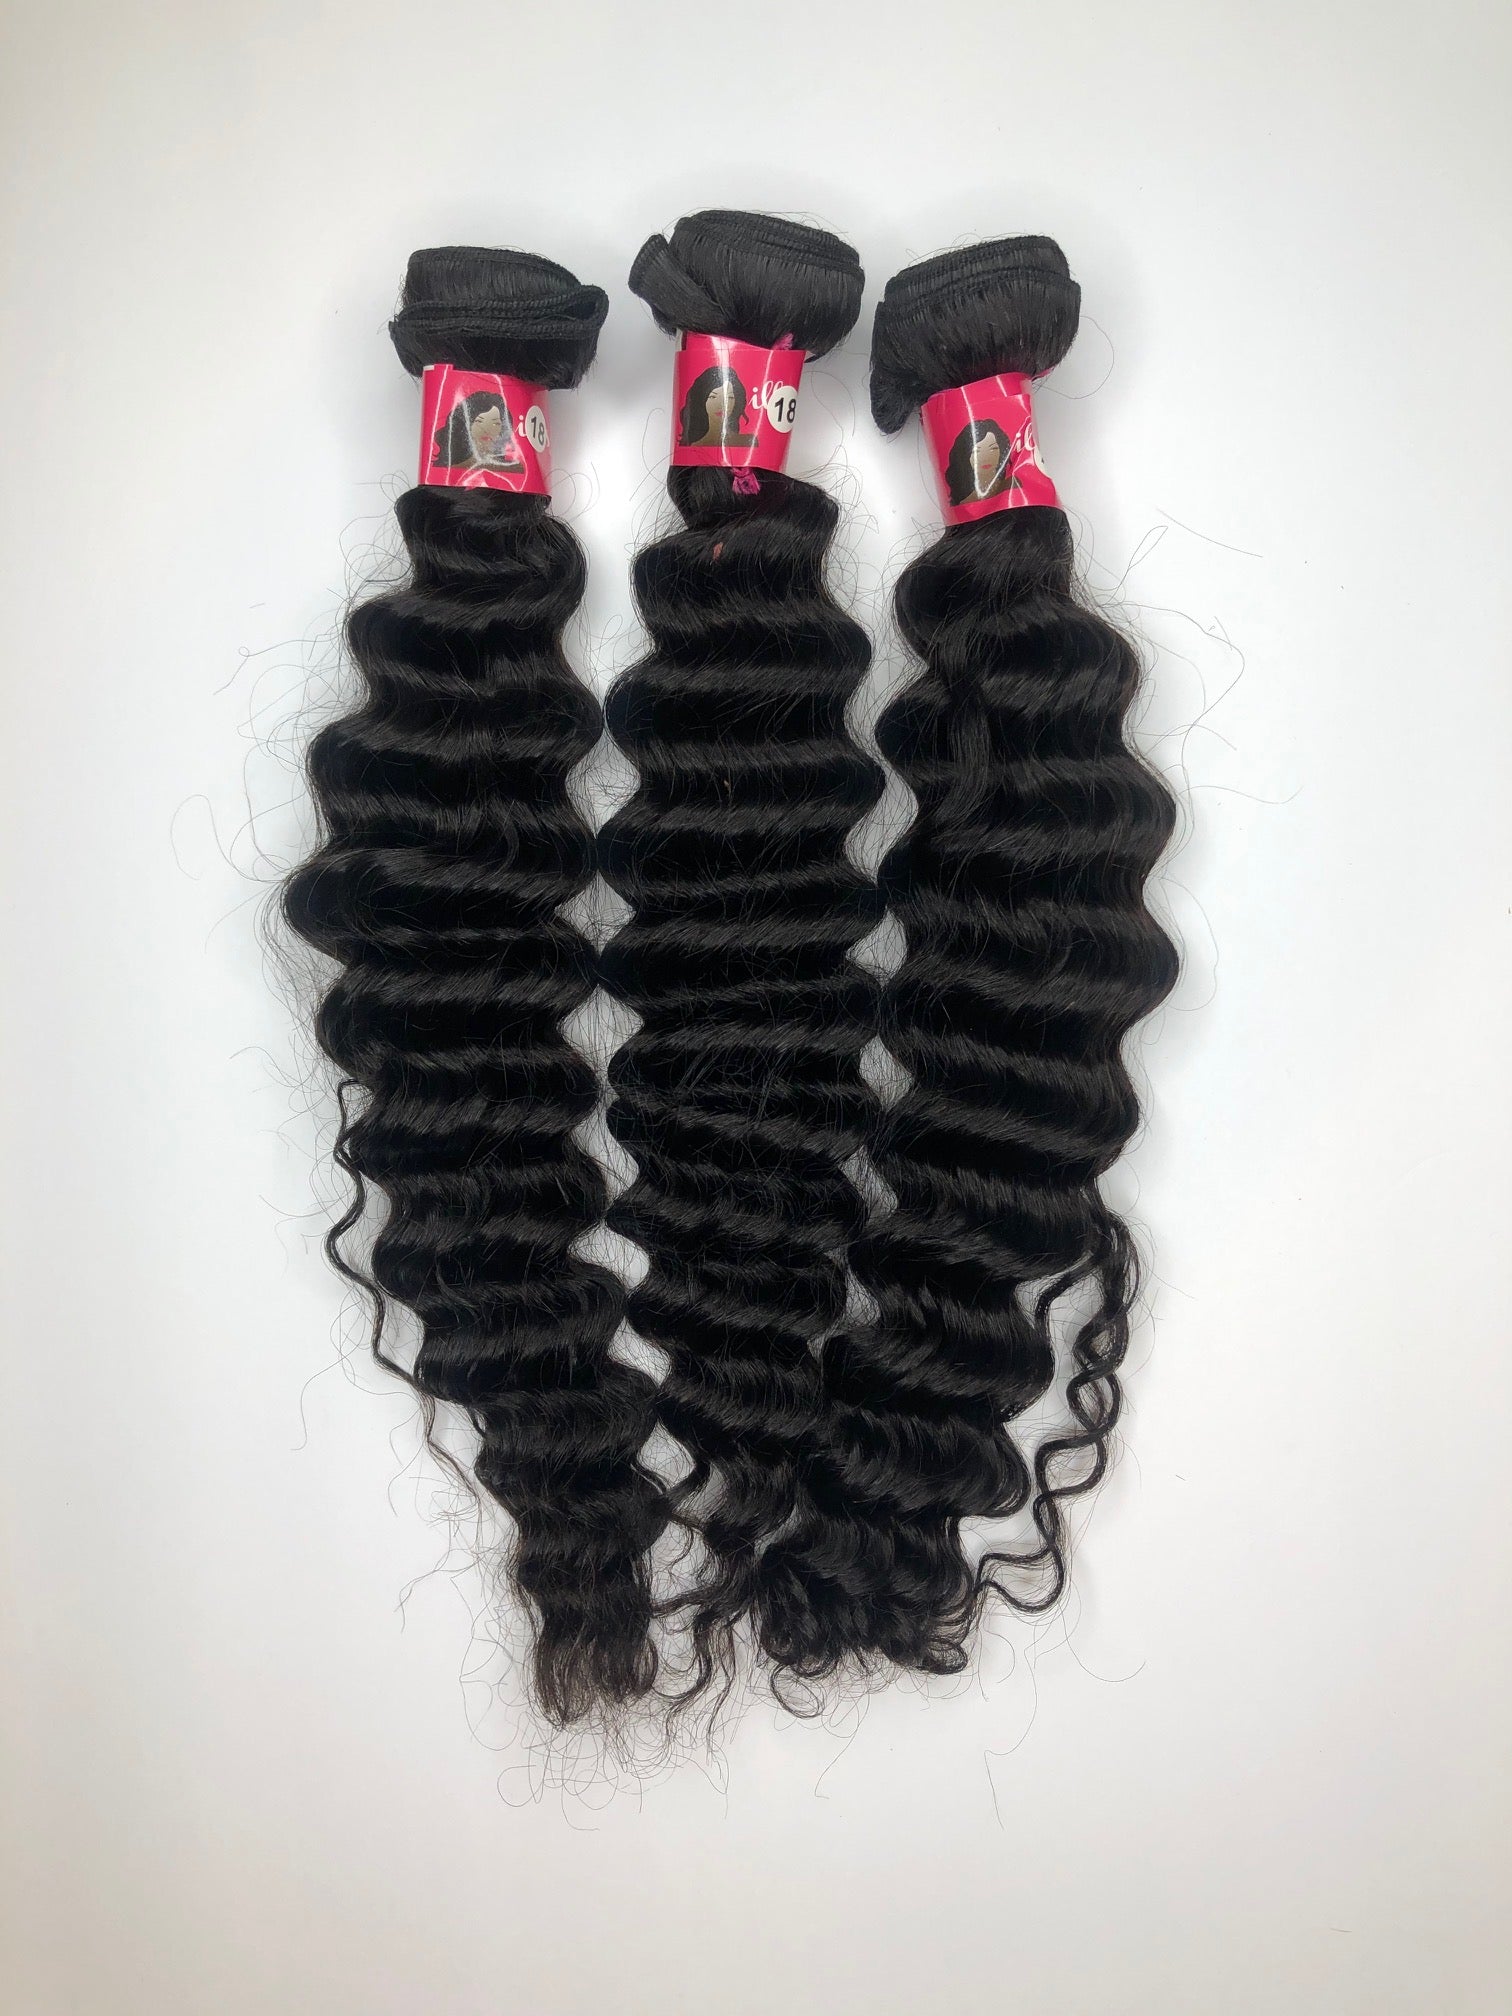 How To Installl Quick Weave Long Hair Step By Step? | by Iqueenla hair |  Medium